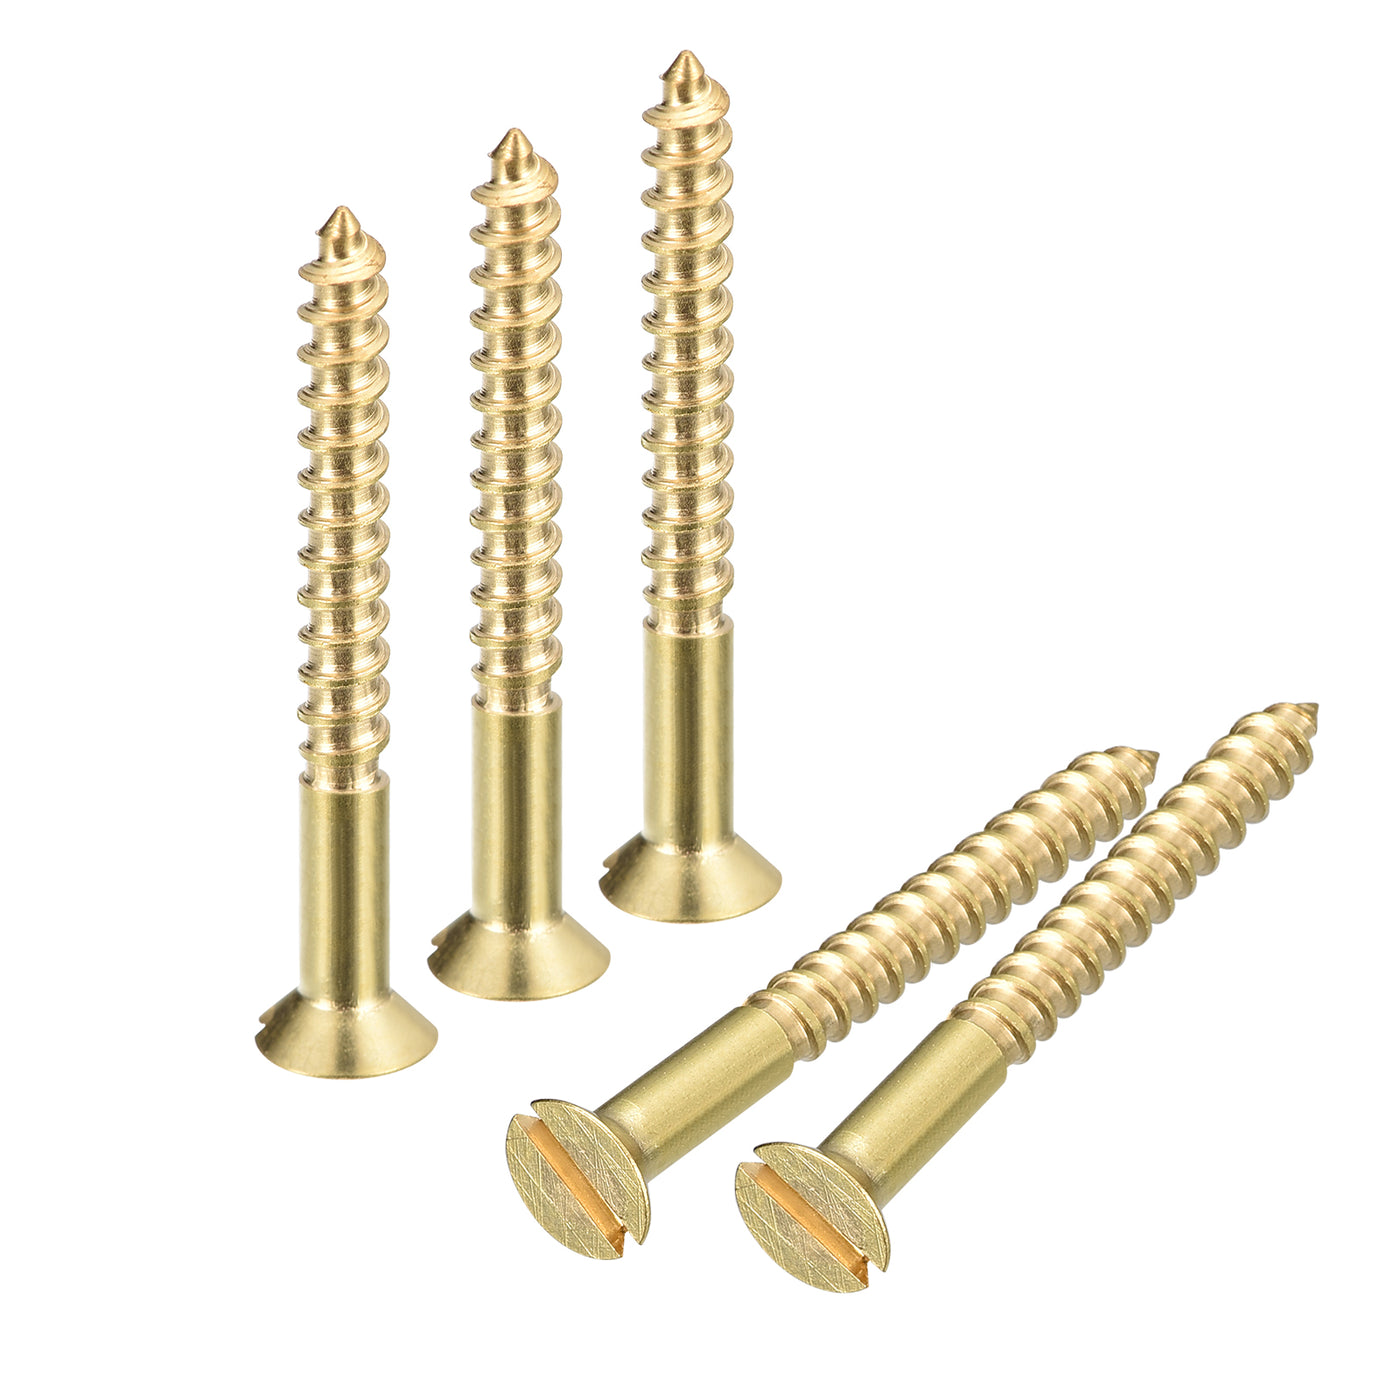 uxcell Uxcell 50Pcs M3 x 30mm Brass Slotted Drive Flat Head Wood Screws Self Tapping Screw